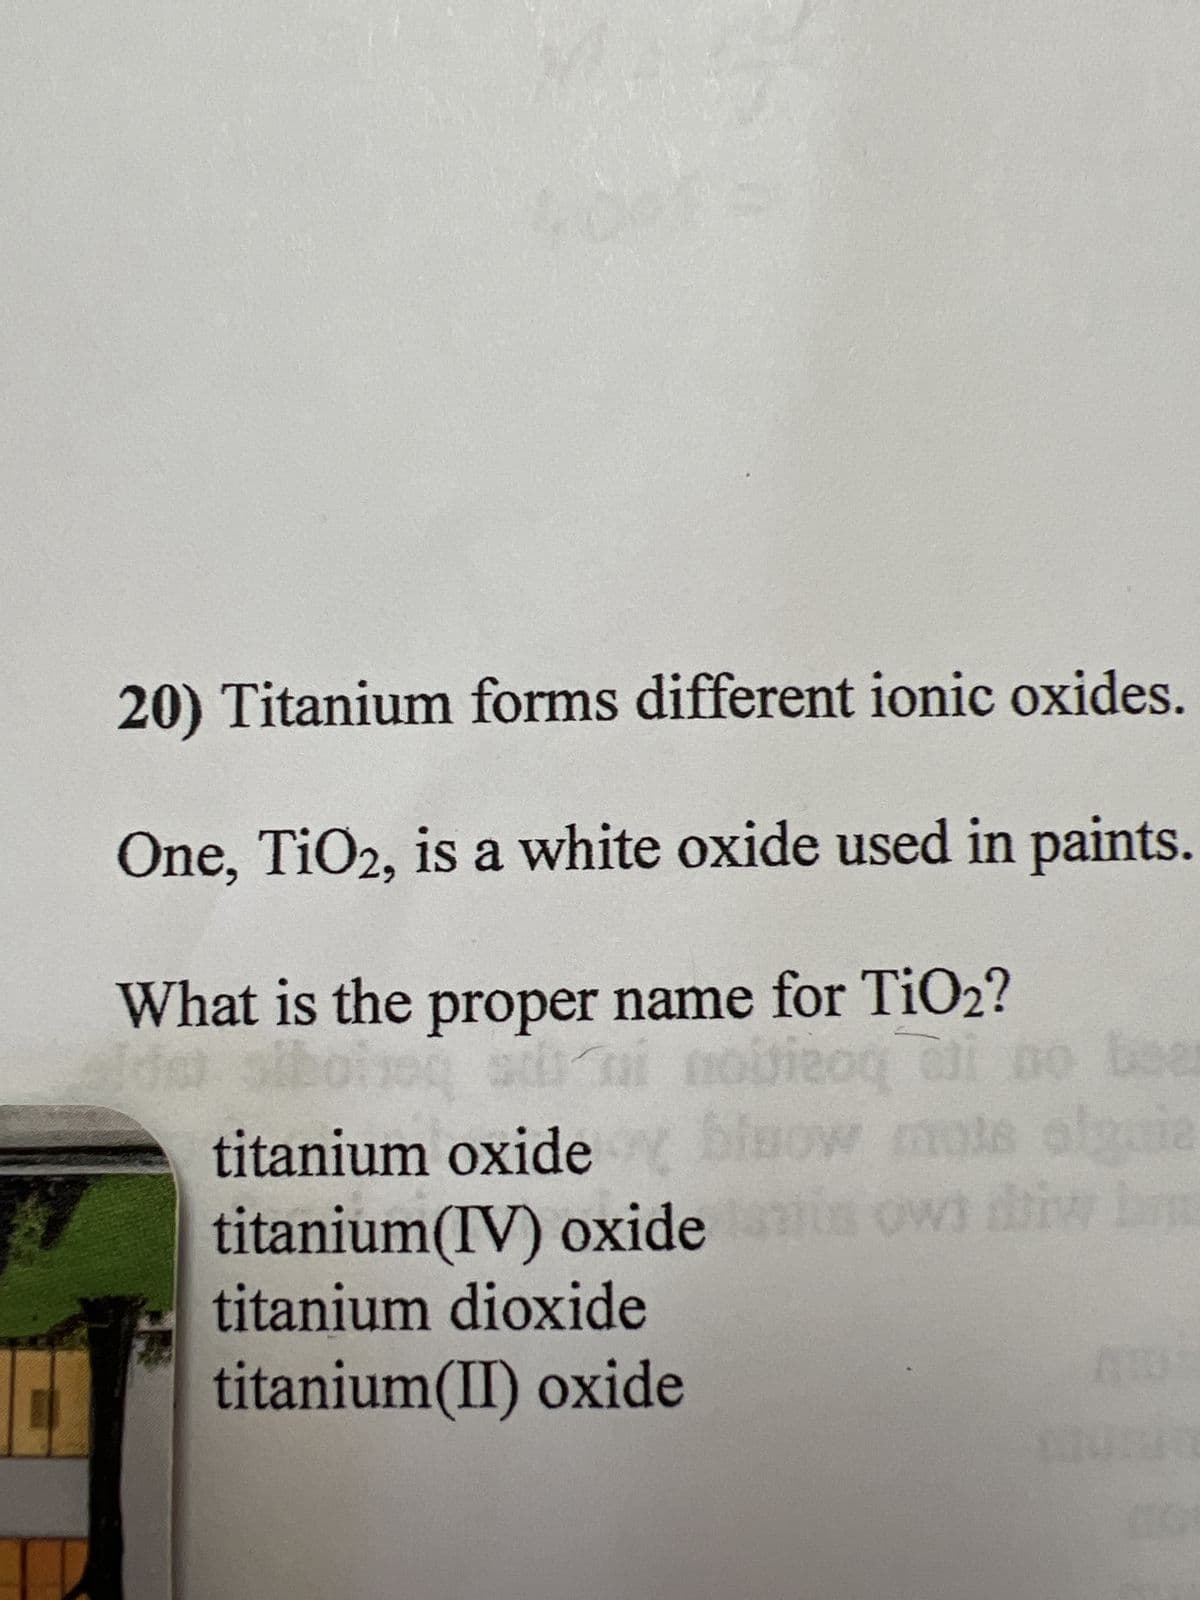 20) Titanium forms different ionic oxides.
One, TiO2, is a white oxide used in paints.
What is the proper name for TiO2?
ni
si novizoq ali no beer
titanium oxidey blow mote alguie
titanium(IV) oxide is own diw b
titanium dioxide
titanium(II) oxide
AUT
unut